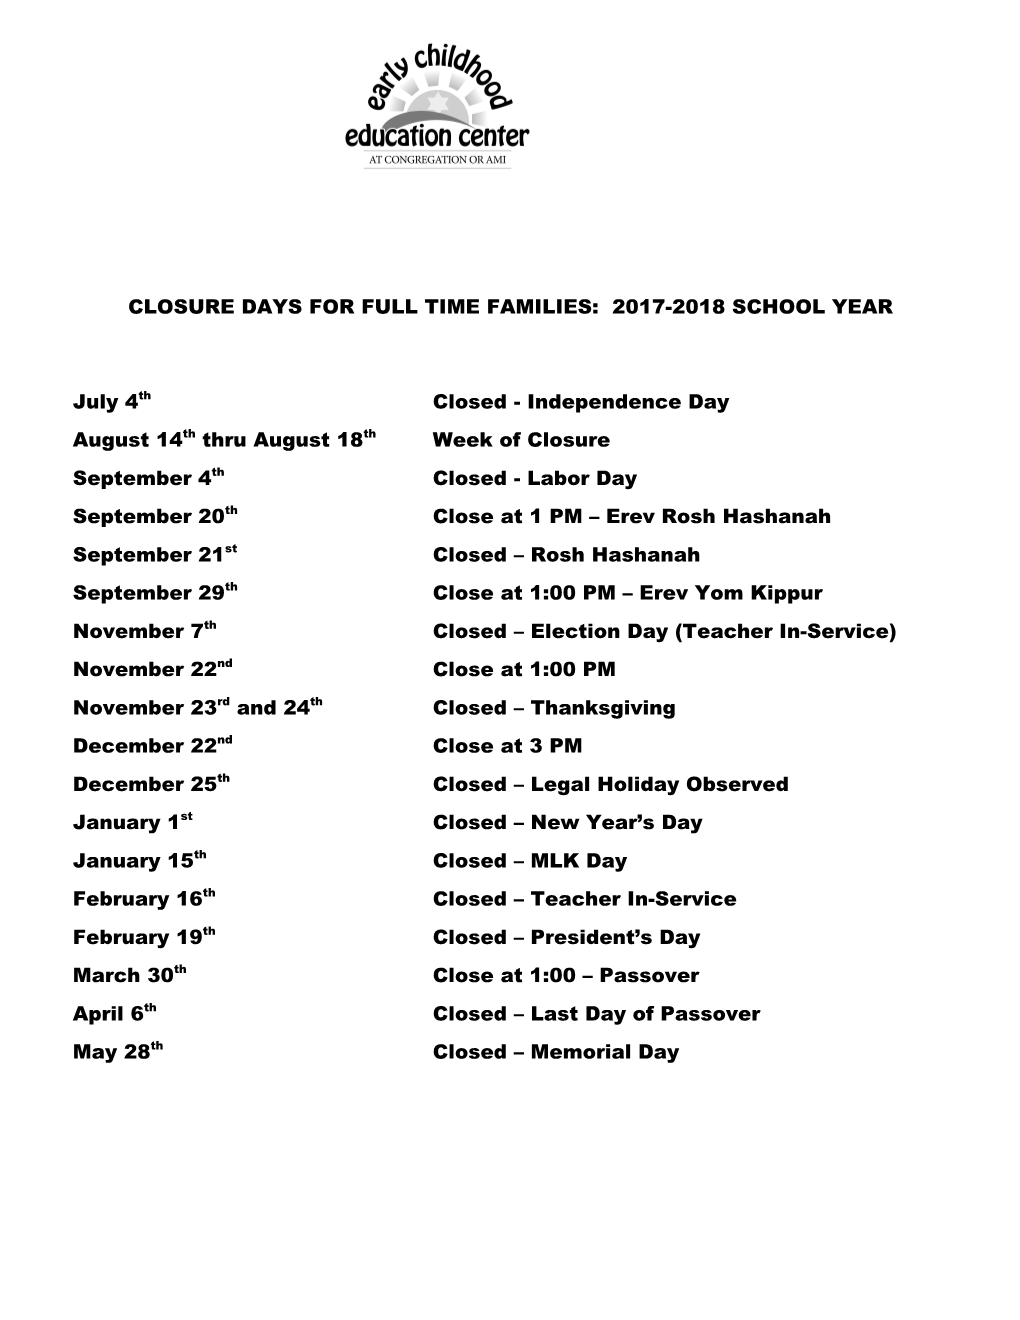 Closure Days for Full Time Families: 2017-2018 School Year